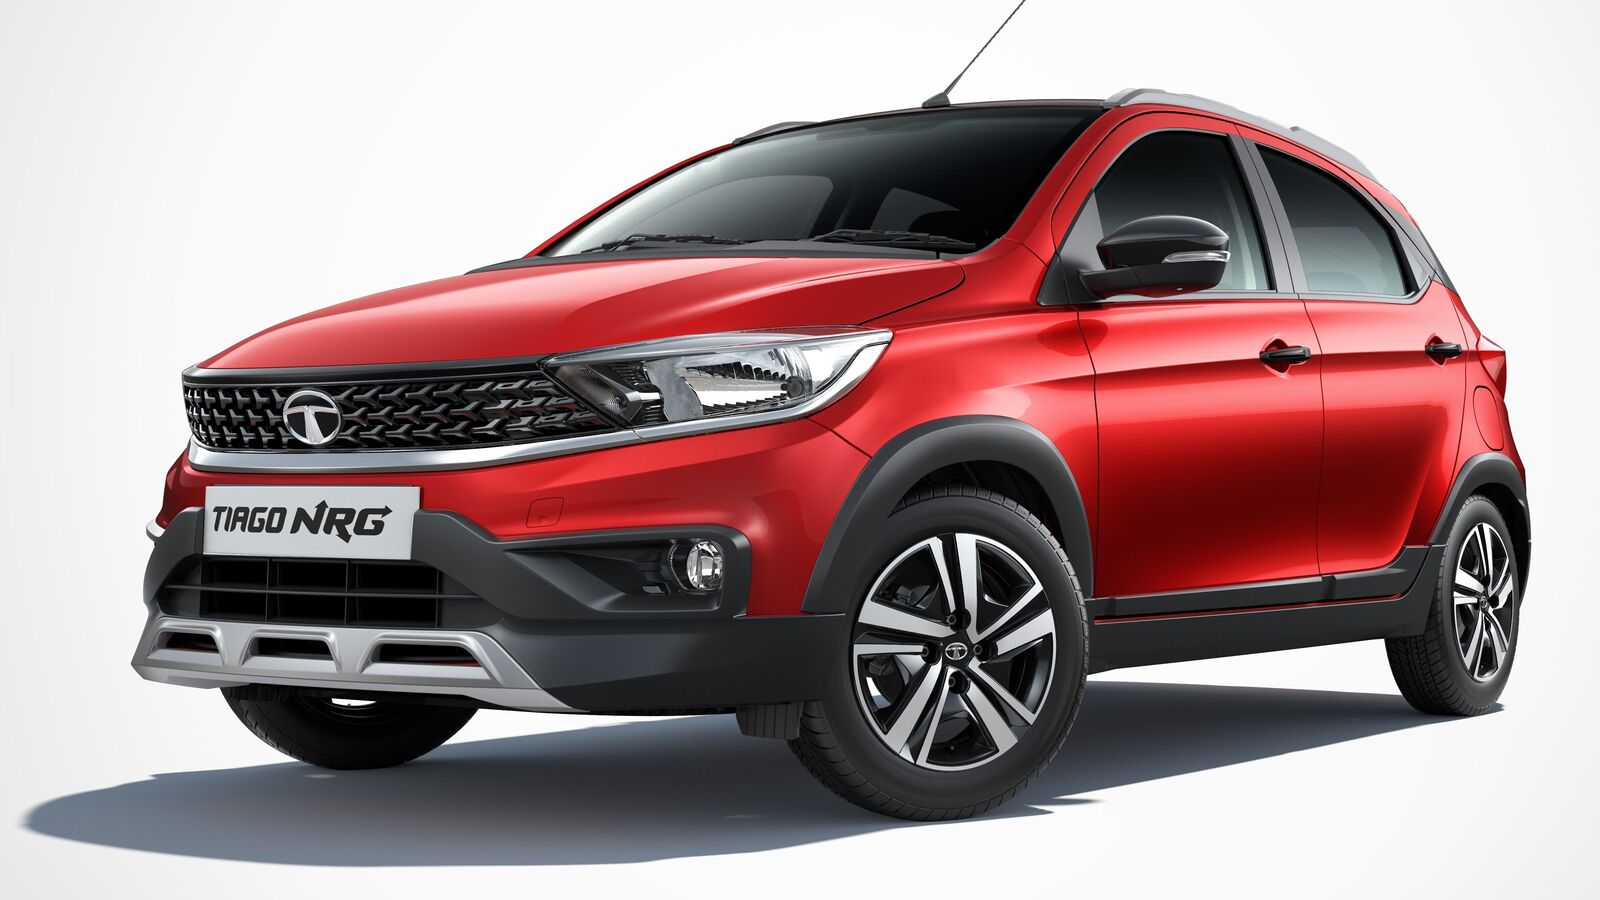 Tata Tiago NRG XT variant launched at ₹6.42 lakh. Here's what's special